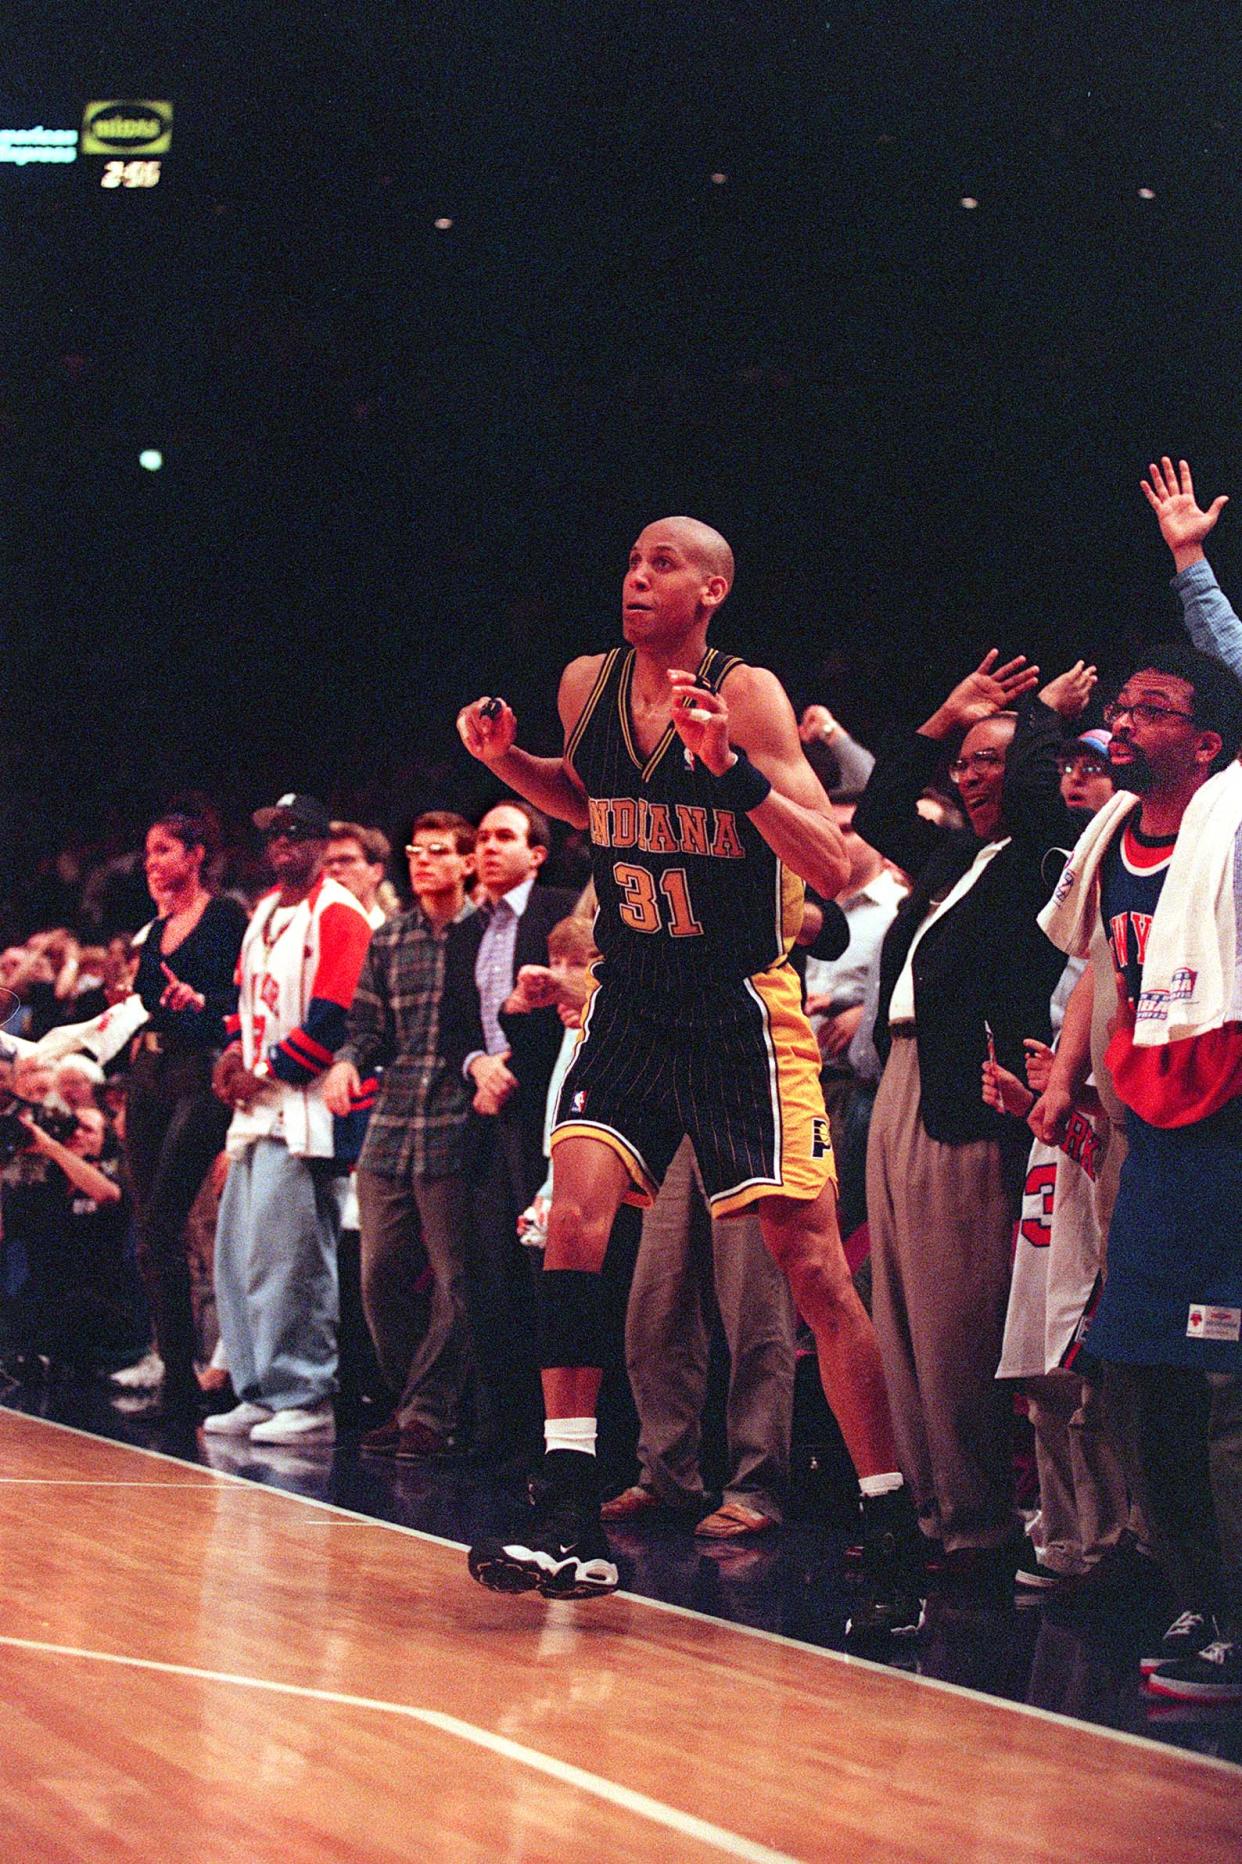 Reggie Miller of the Indiana Pacers hitting a clutch shot against the New York Knicks during their playoff battles in the 1990s.